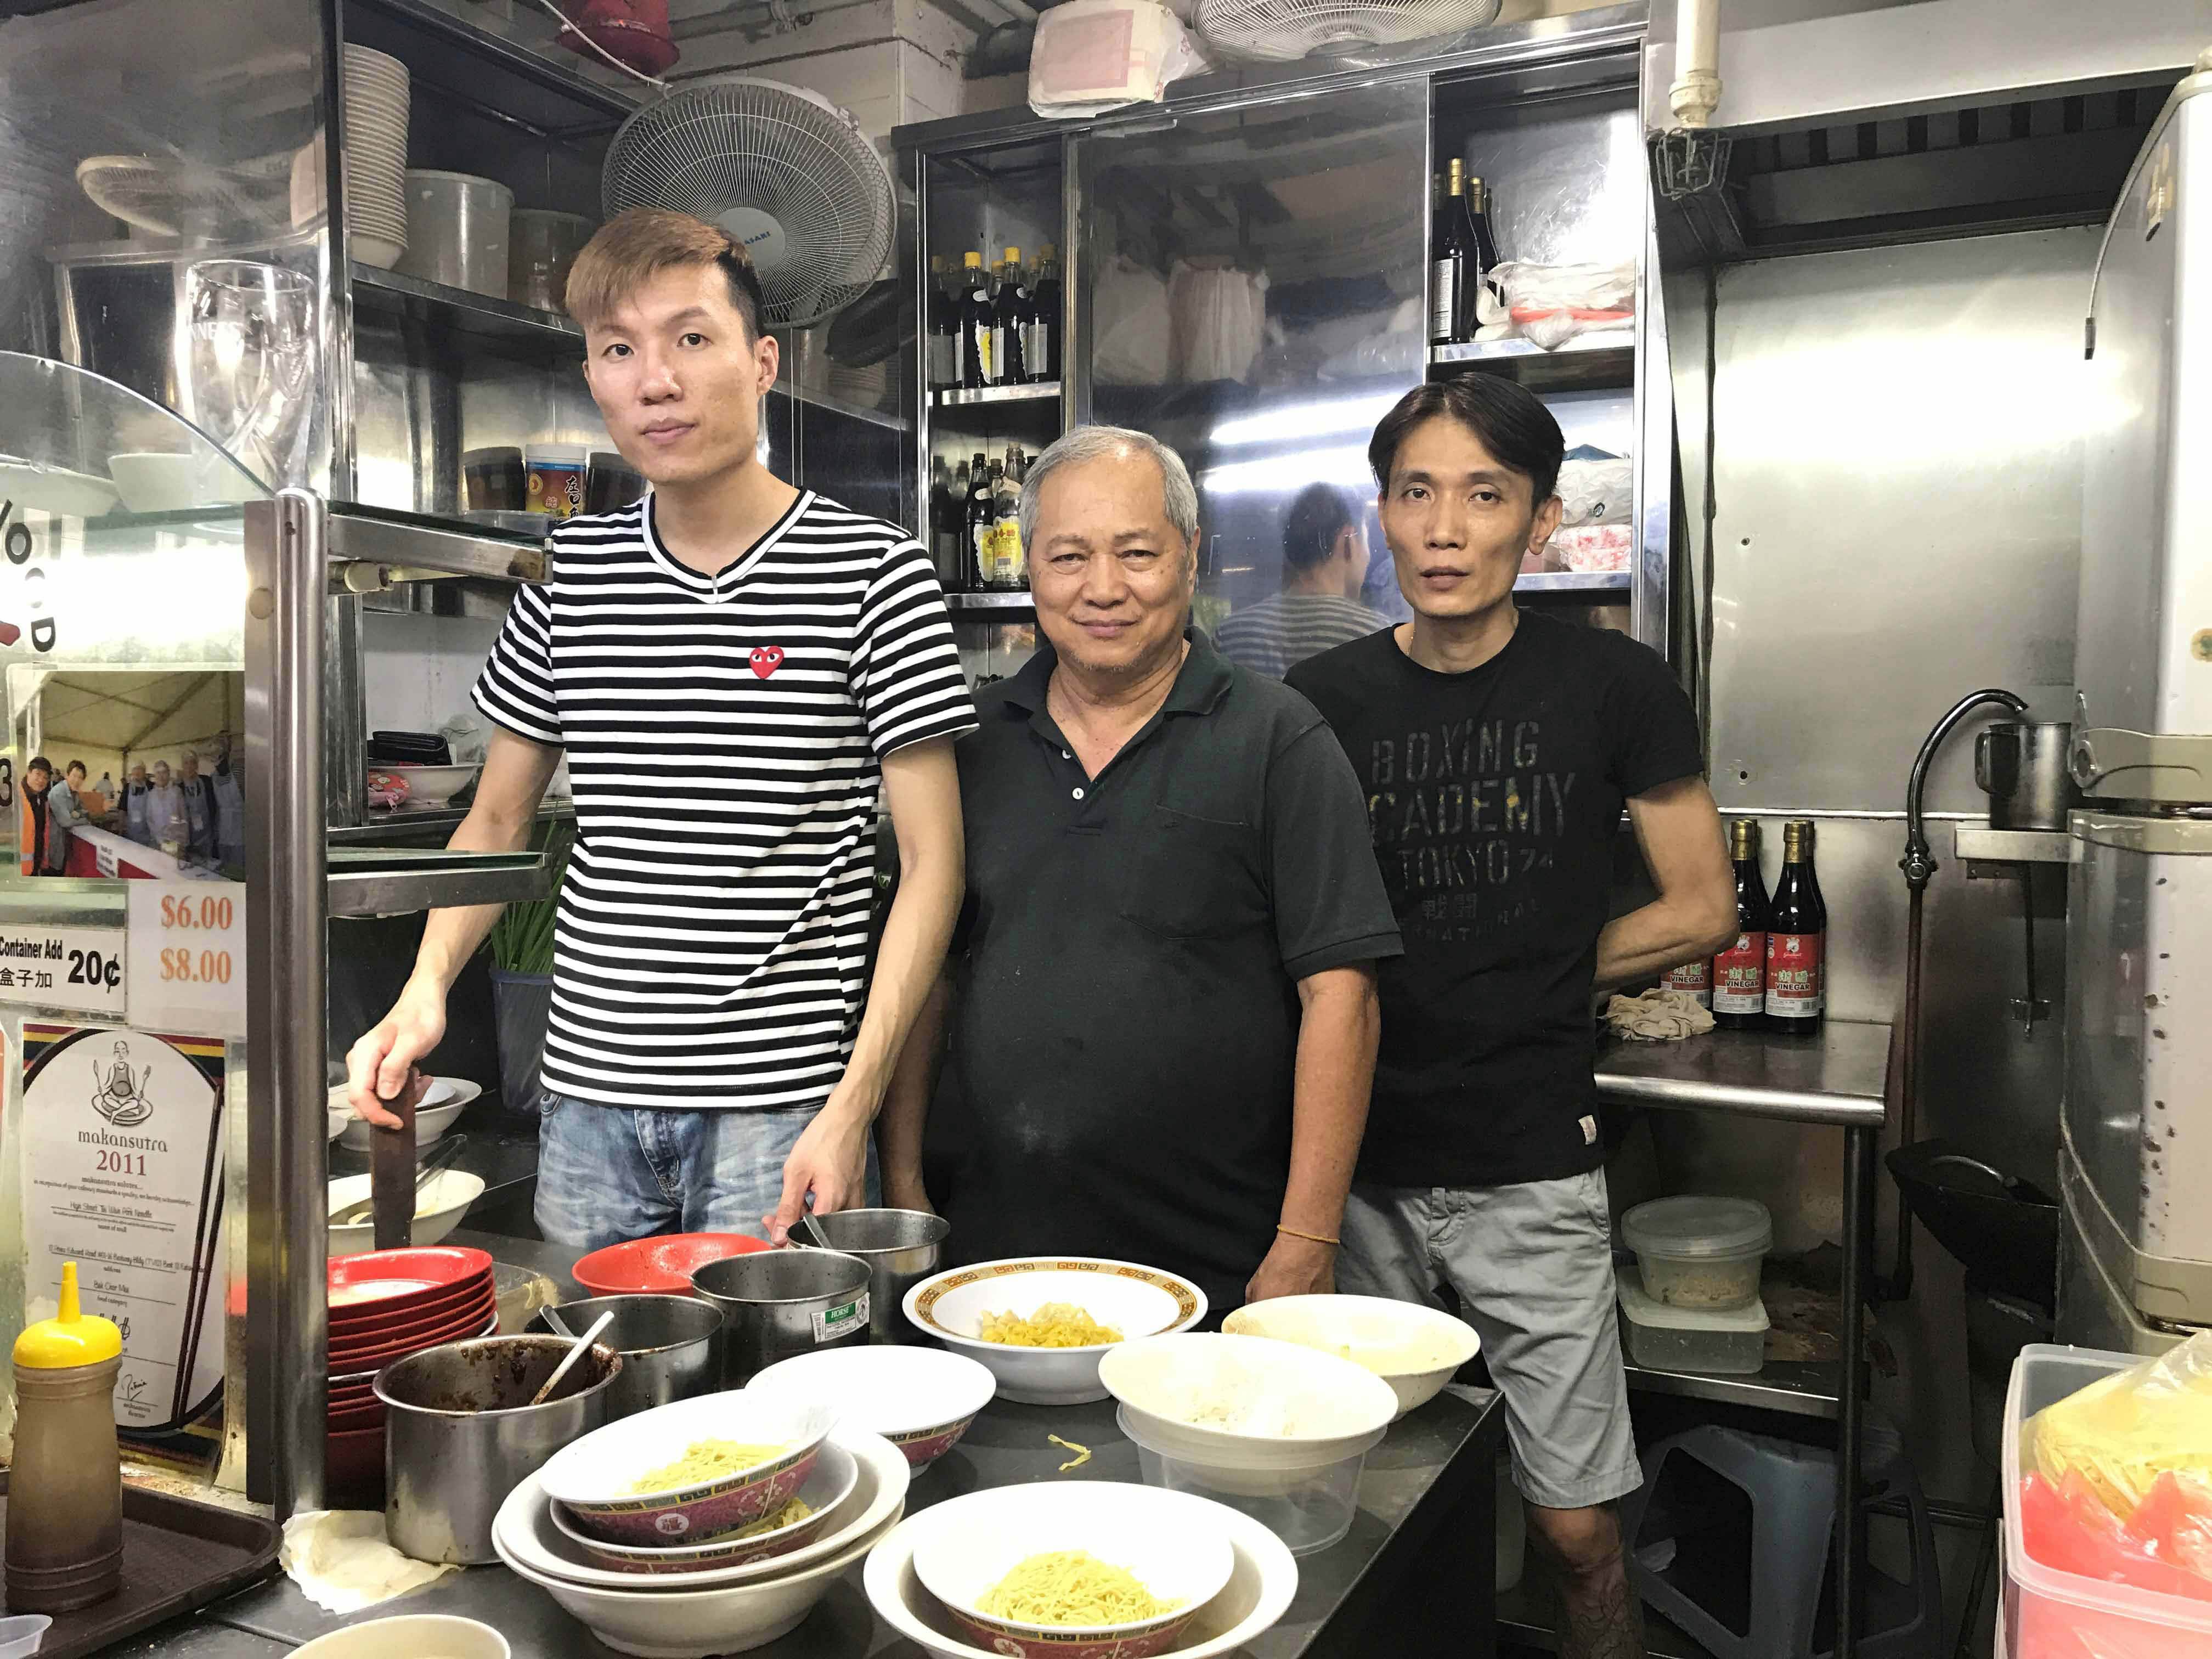 High St Tai Wah Pork Noodle towkay: Incubation period the biggest worry